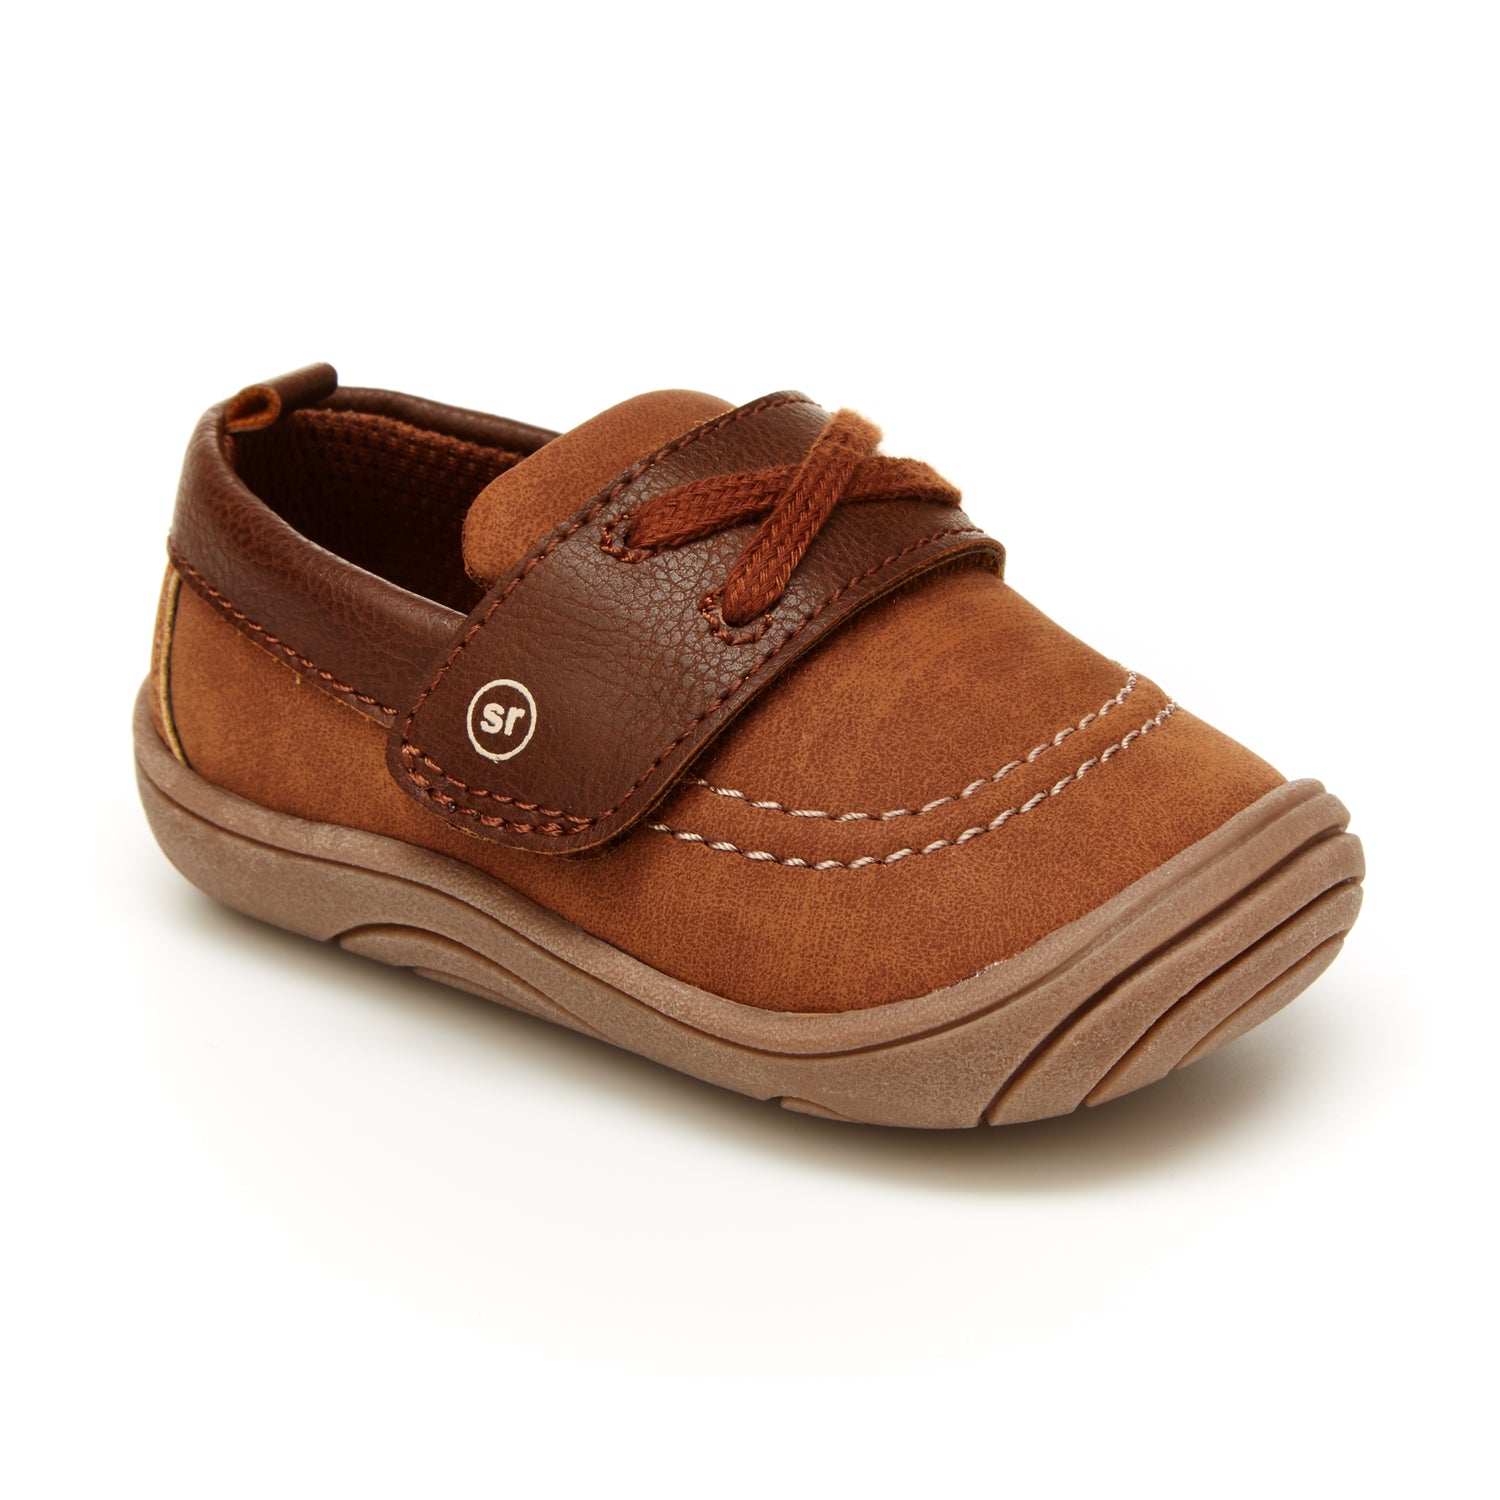 All Boat Shoes